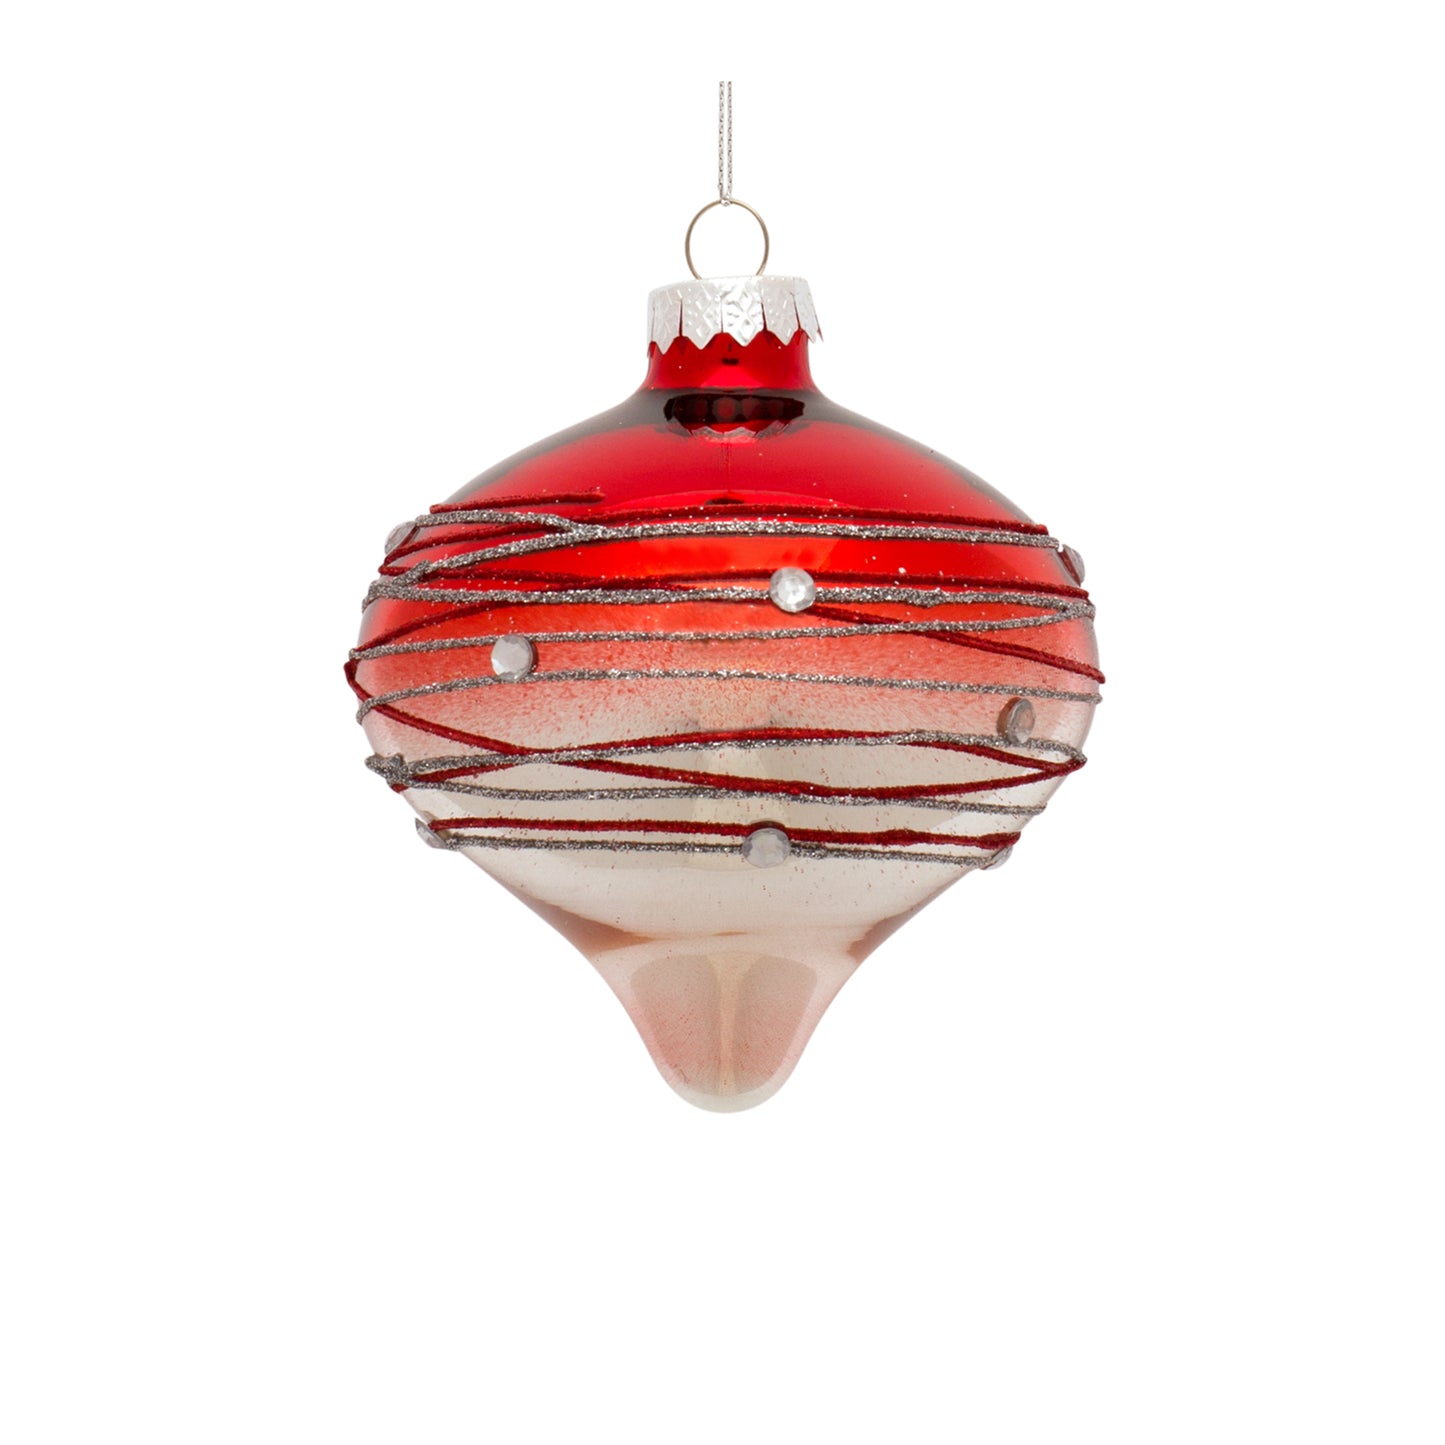 Red Elegance Ball, Finial, or Onion Glass Ornament